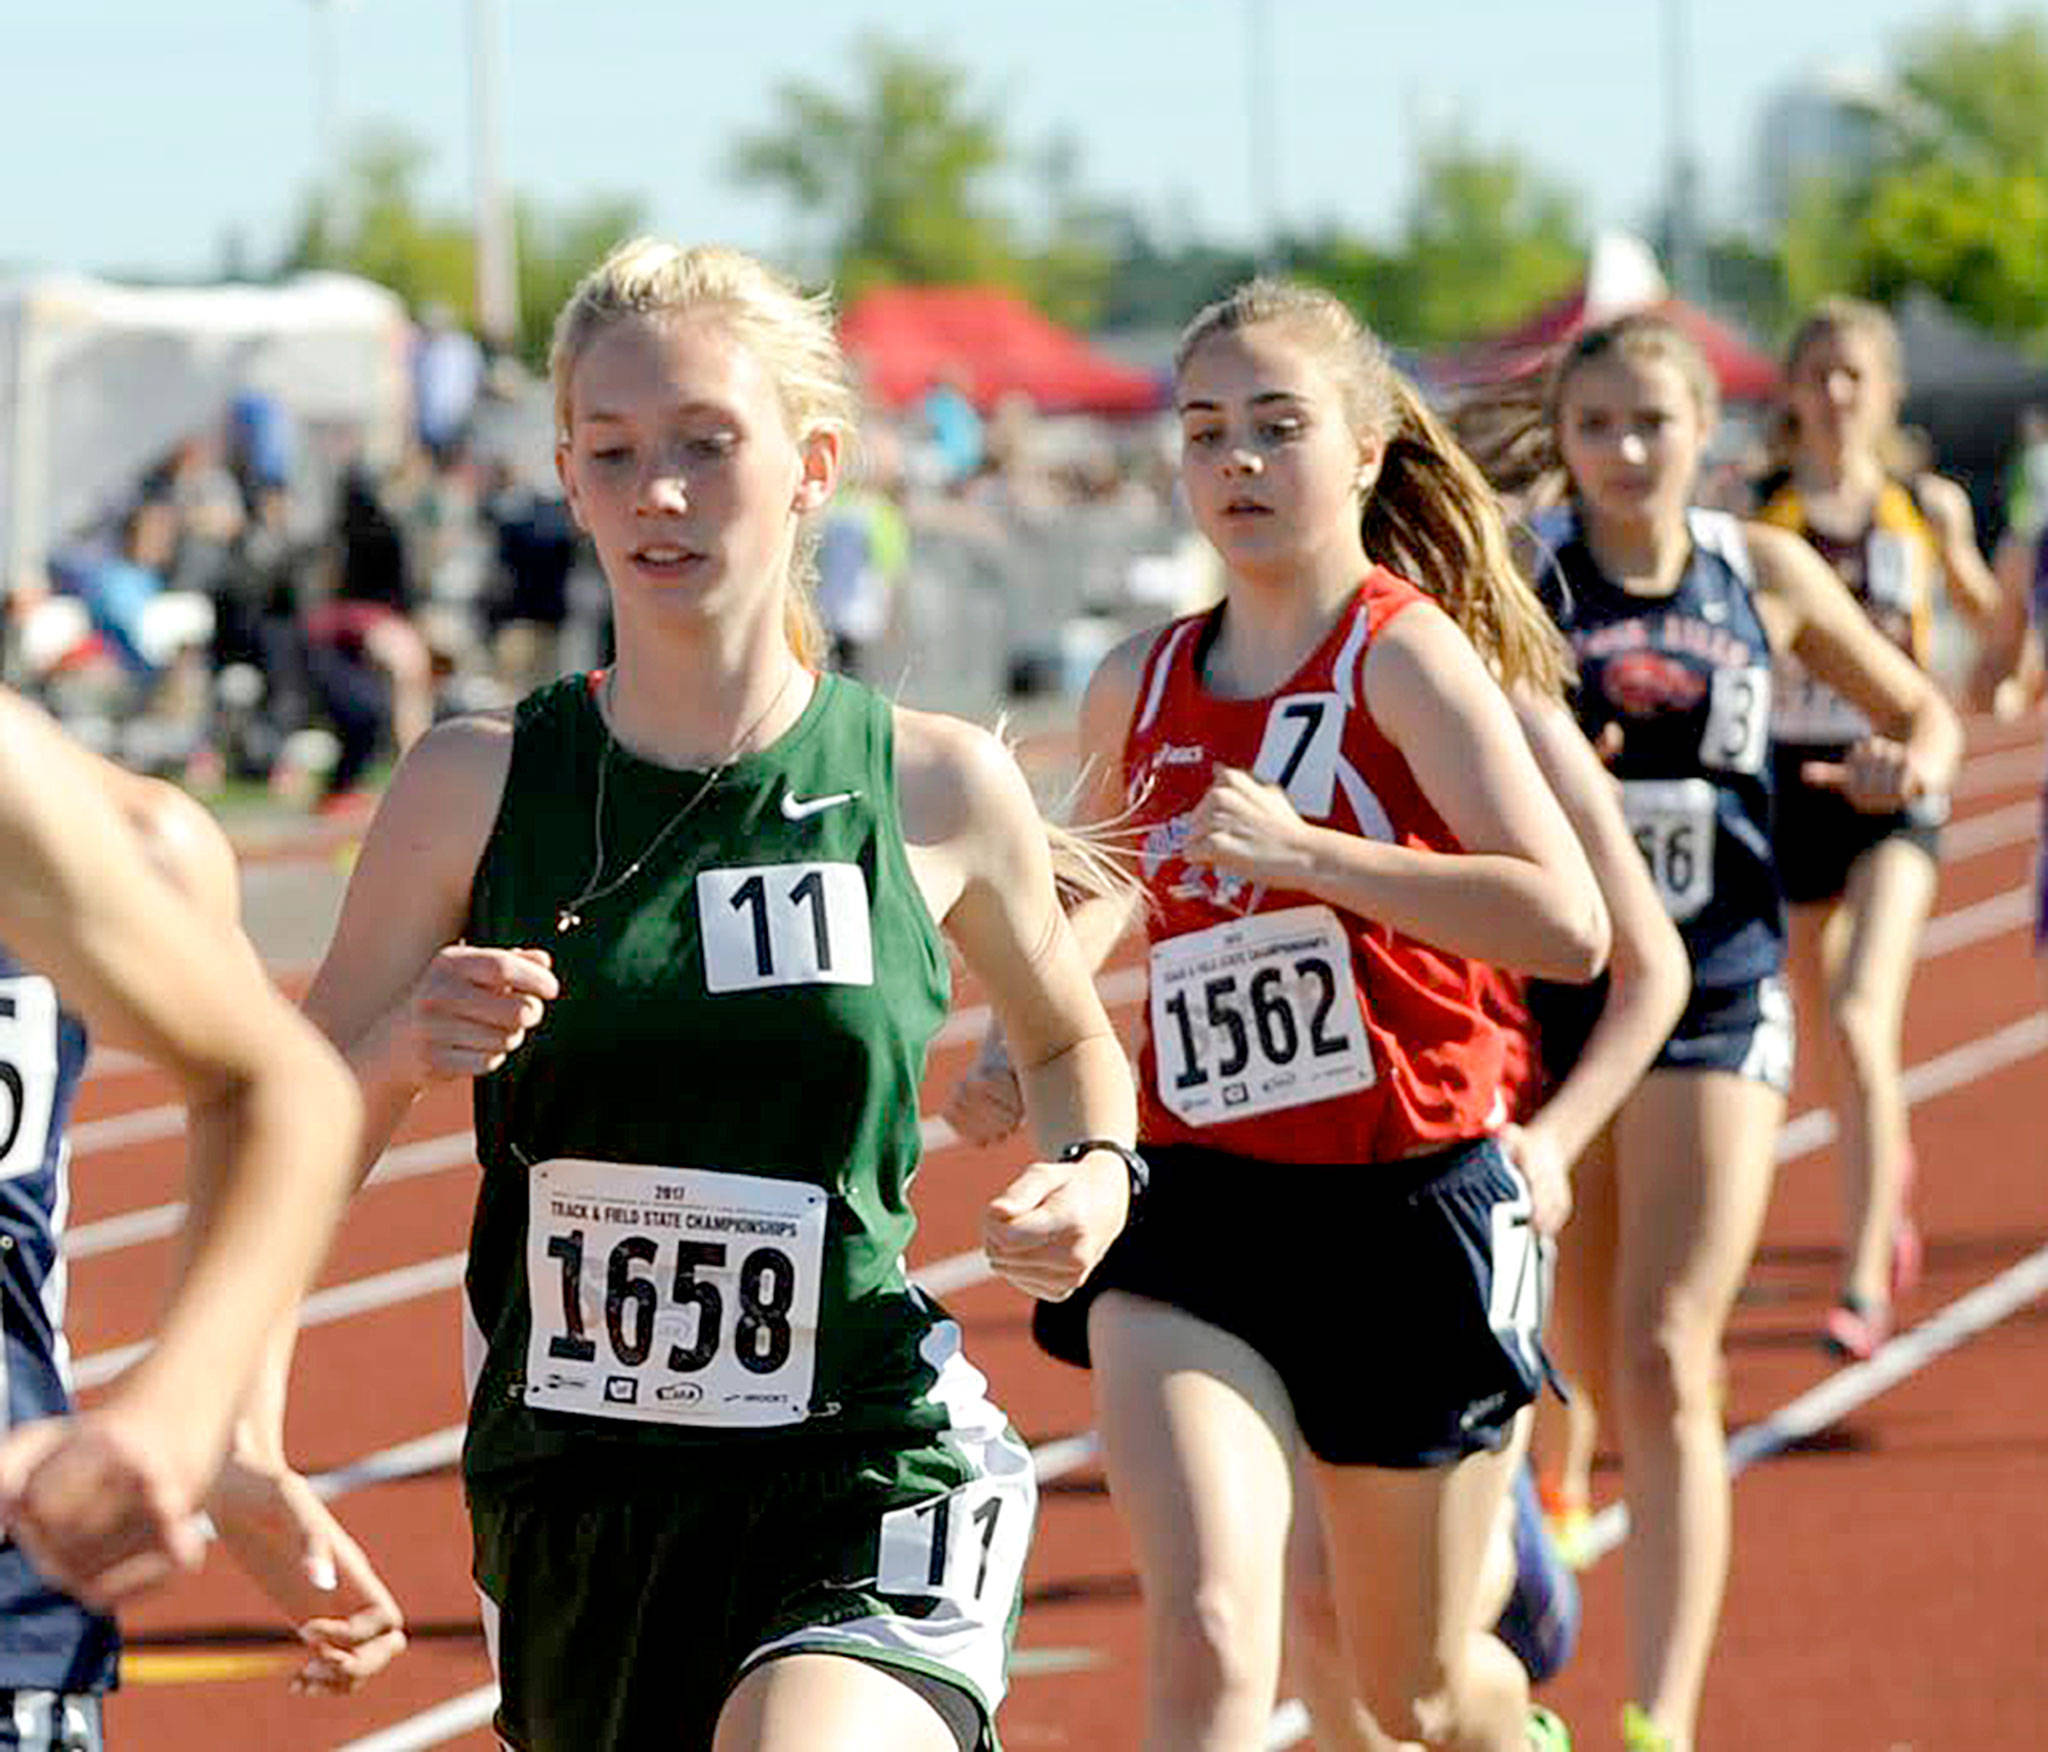 Michael Dashiell/Olympic Peninsula News Group Port Angeles’ Gracie Long (No. 1658) finished seventh in the girls’ 1,600-meter run Friday at the State 2A Track and Field Championships at Mount Tahoma High School. Long’s time of 5:08.58 broke a 33-year-old Port Angles High School record.